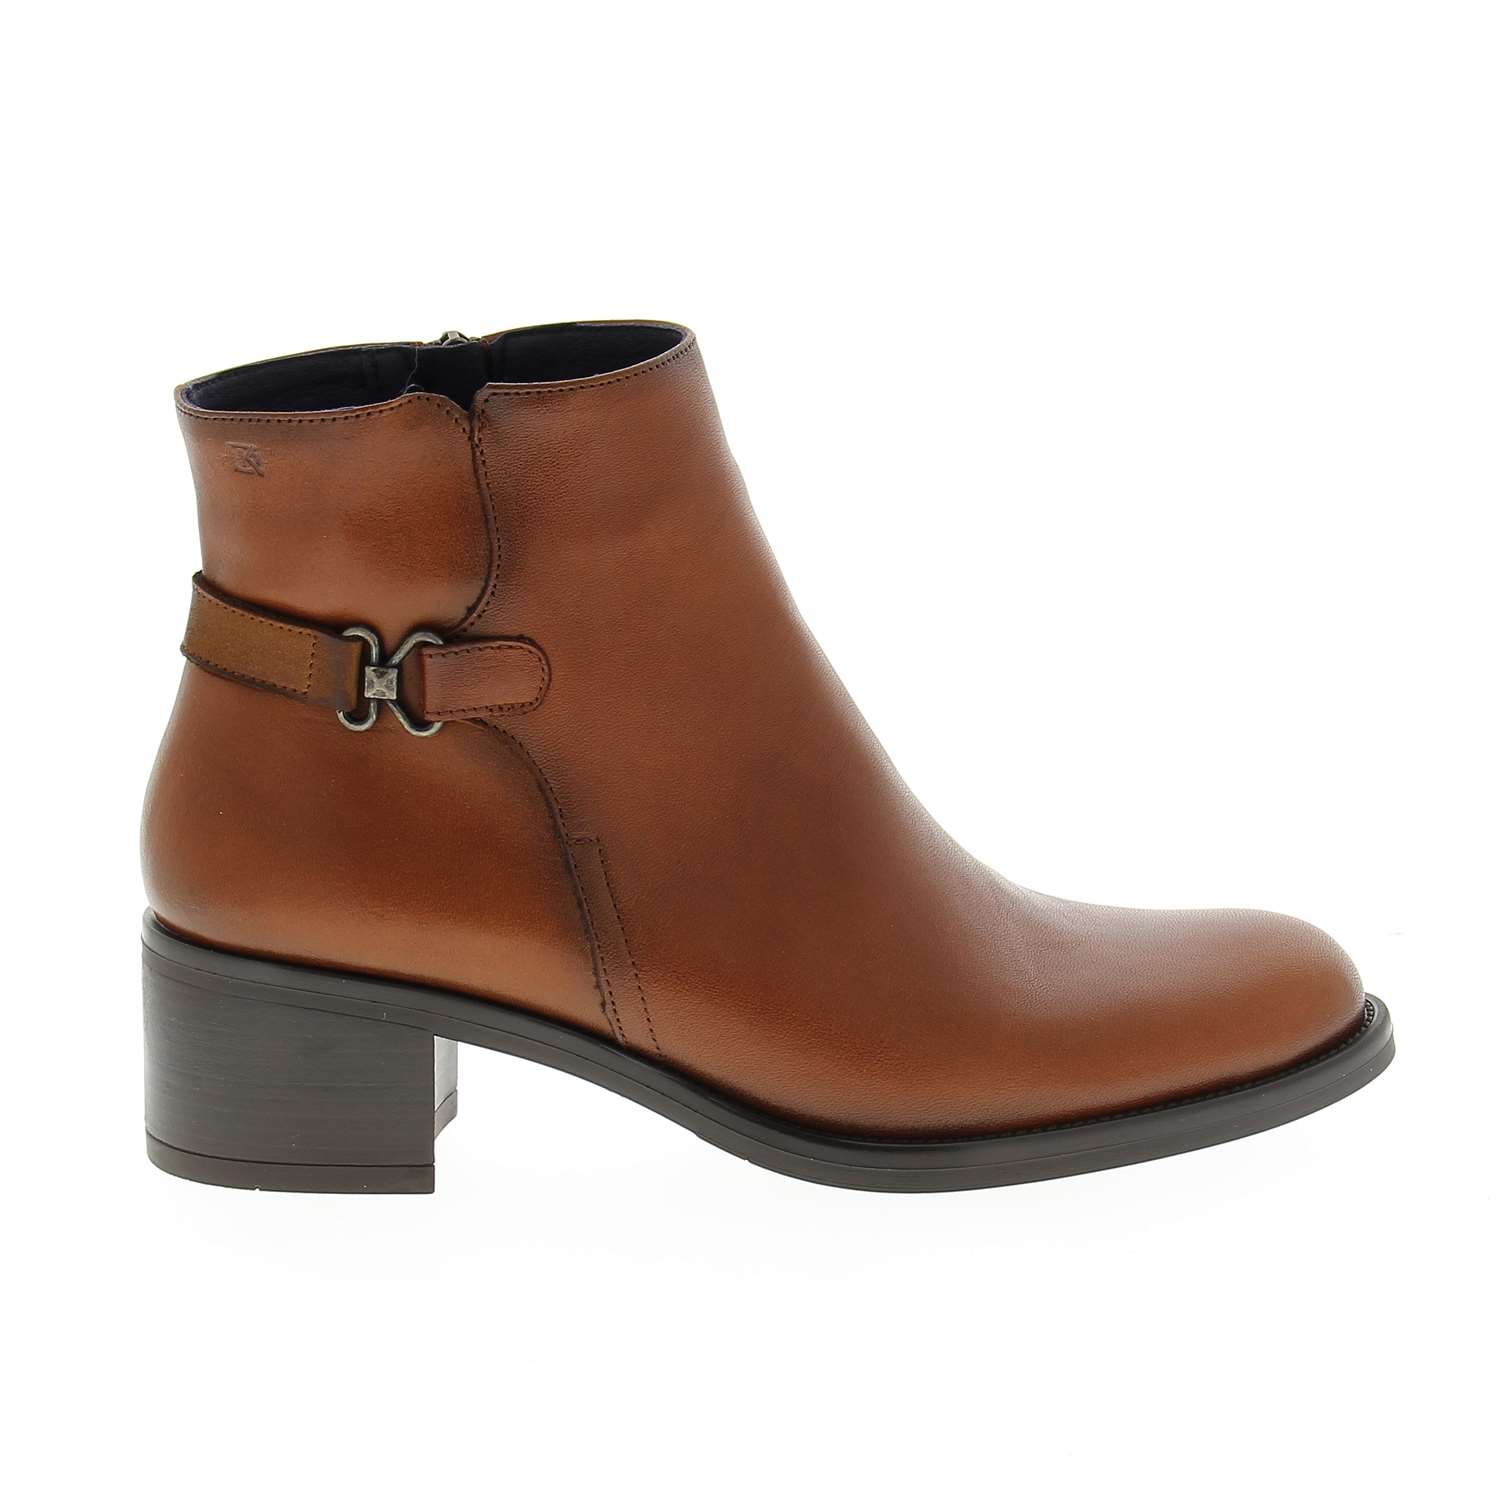 02 - DOLINOTE -  - Boots et bottines - Cuir